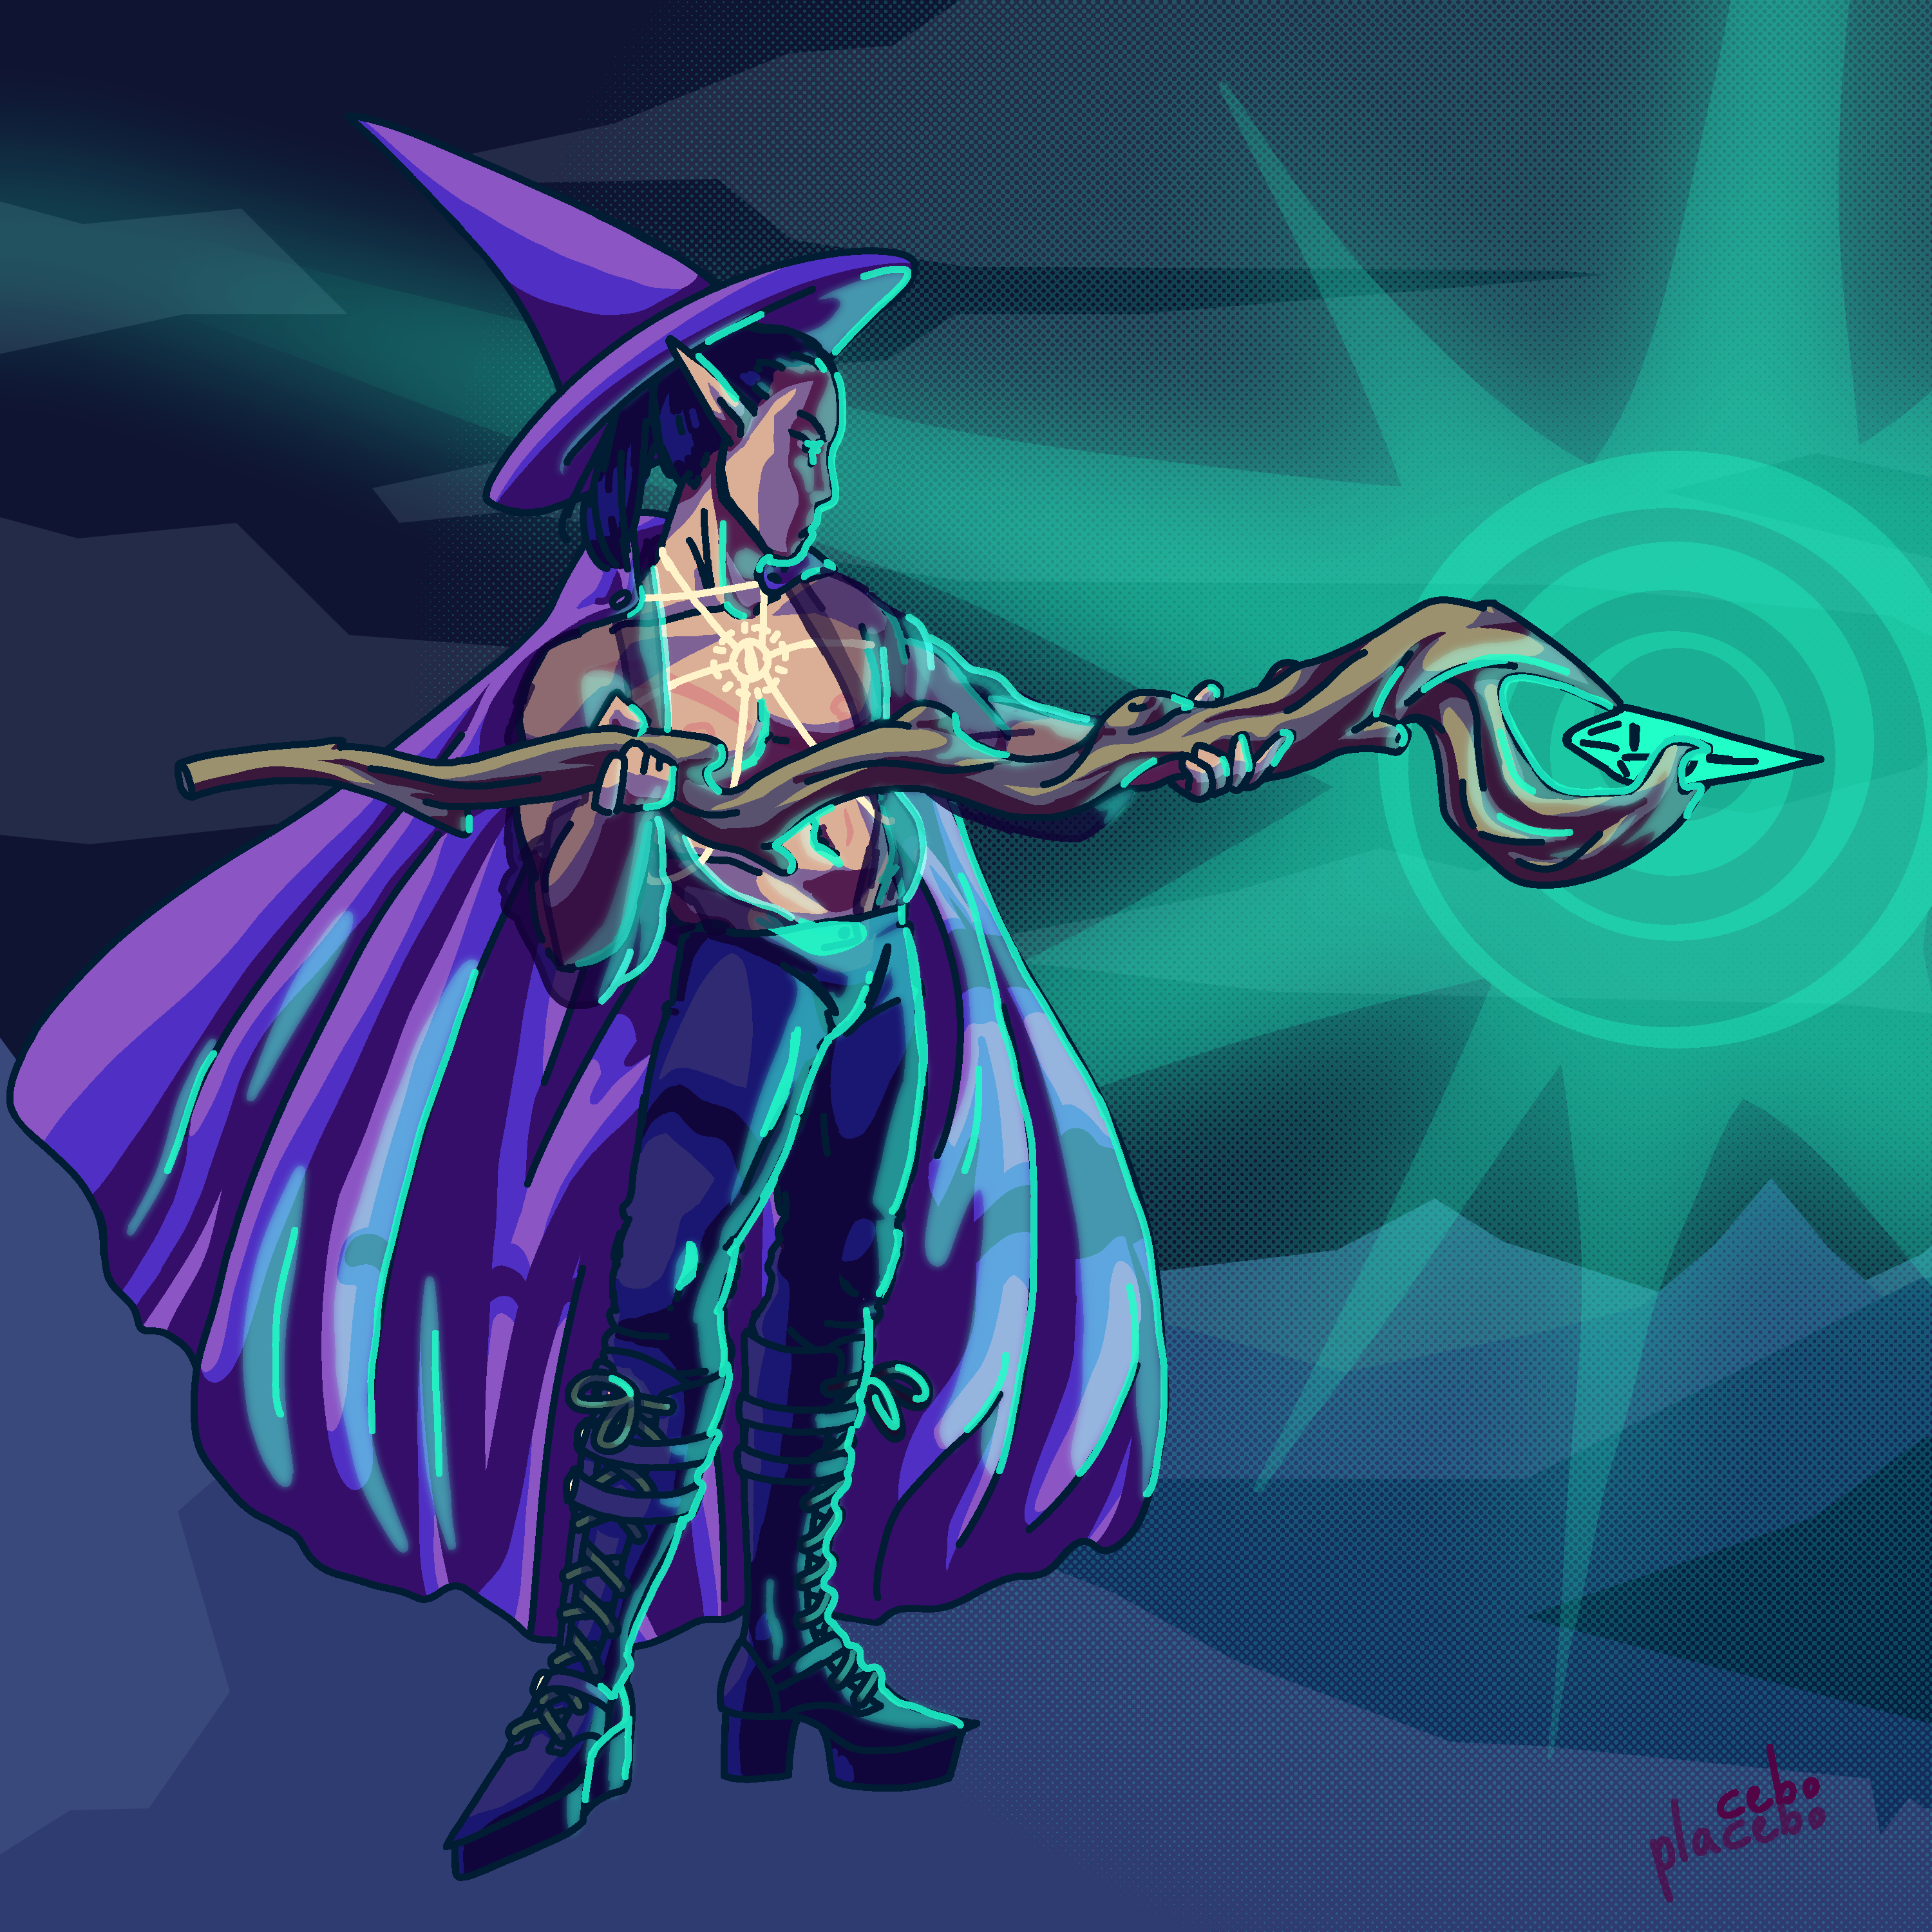 A wizard elf with an intense expression pointing a staff with a glowing crystal.